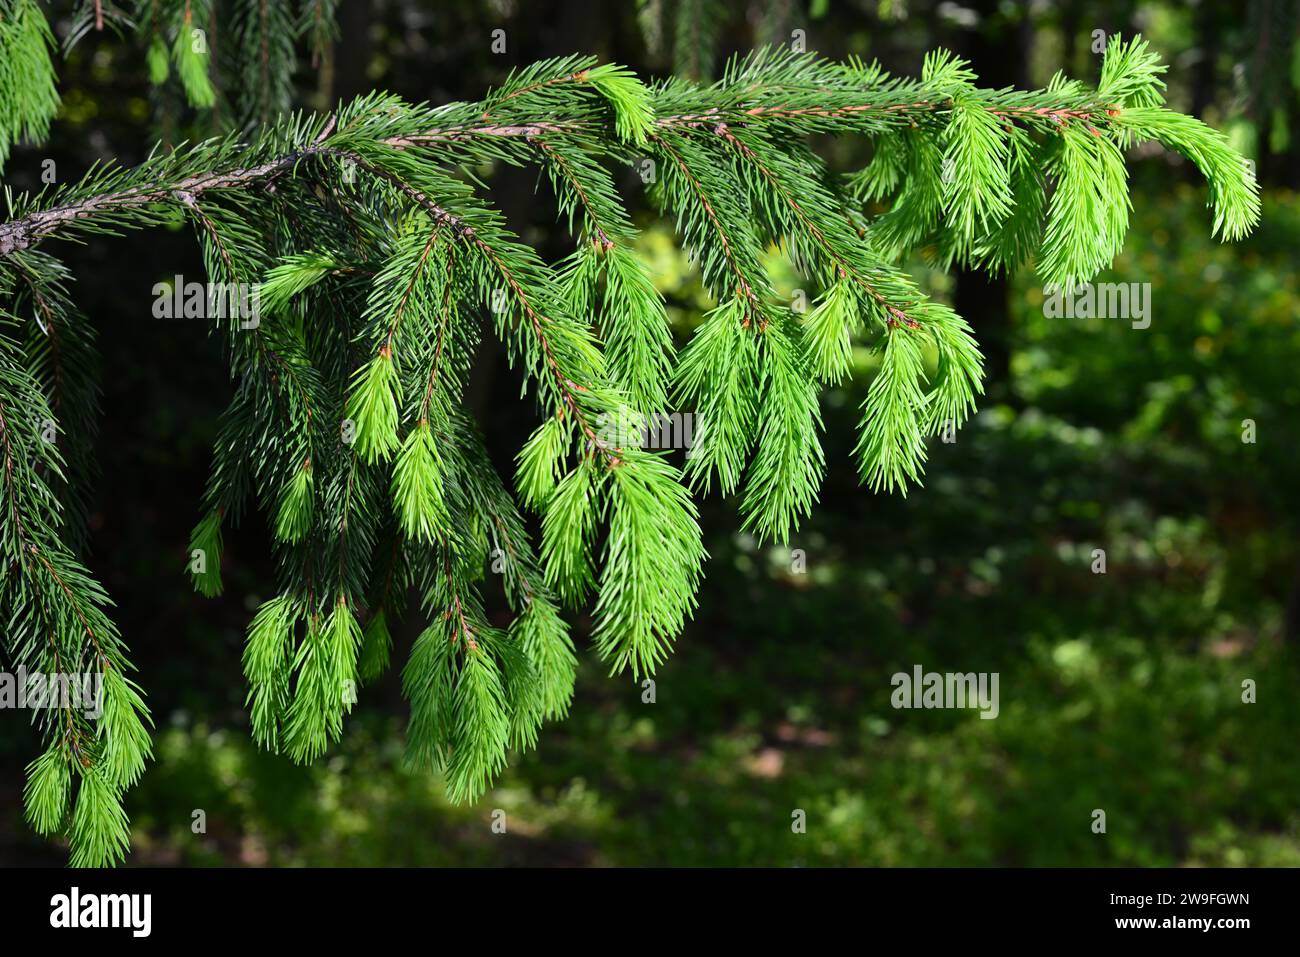 A branch of European spruce or Picea abies with young shoots. Cultivar Virgata or Snake branch spruce Stock Photo